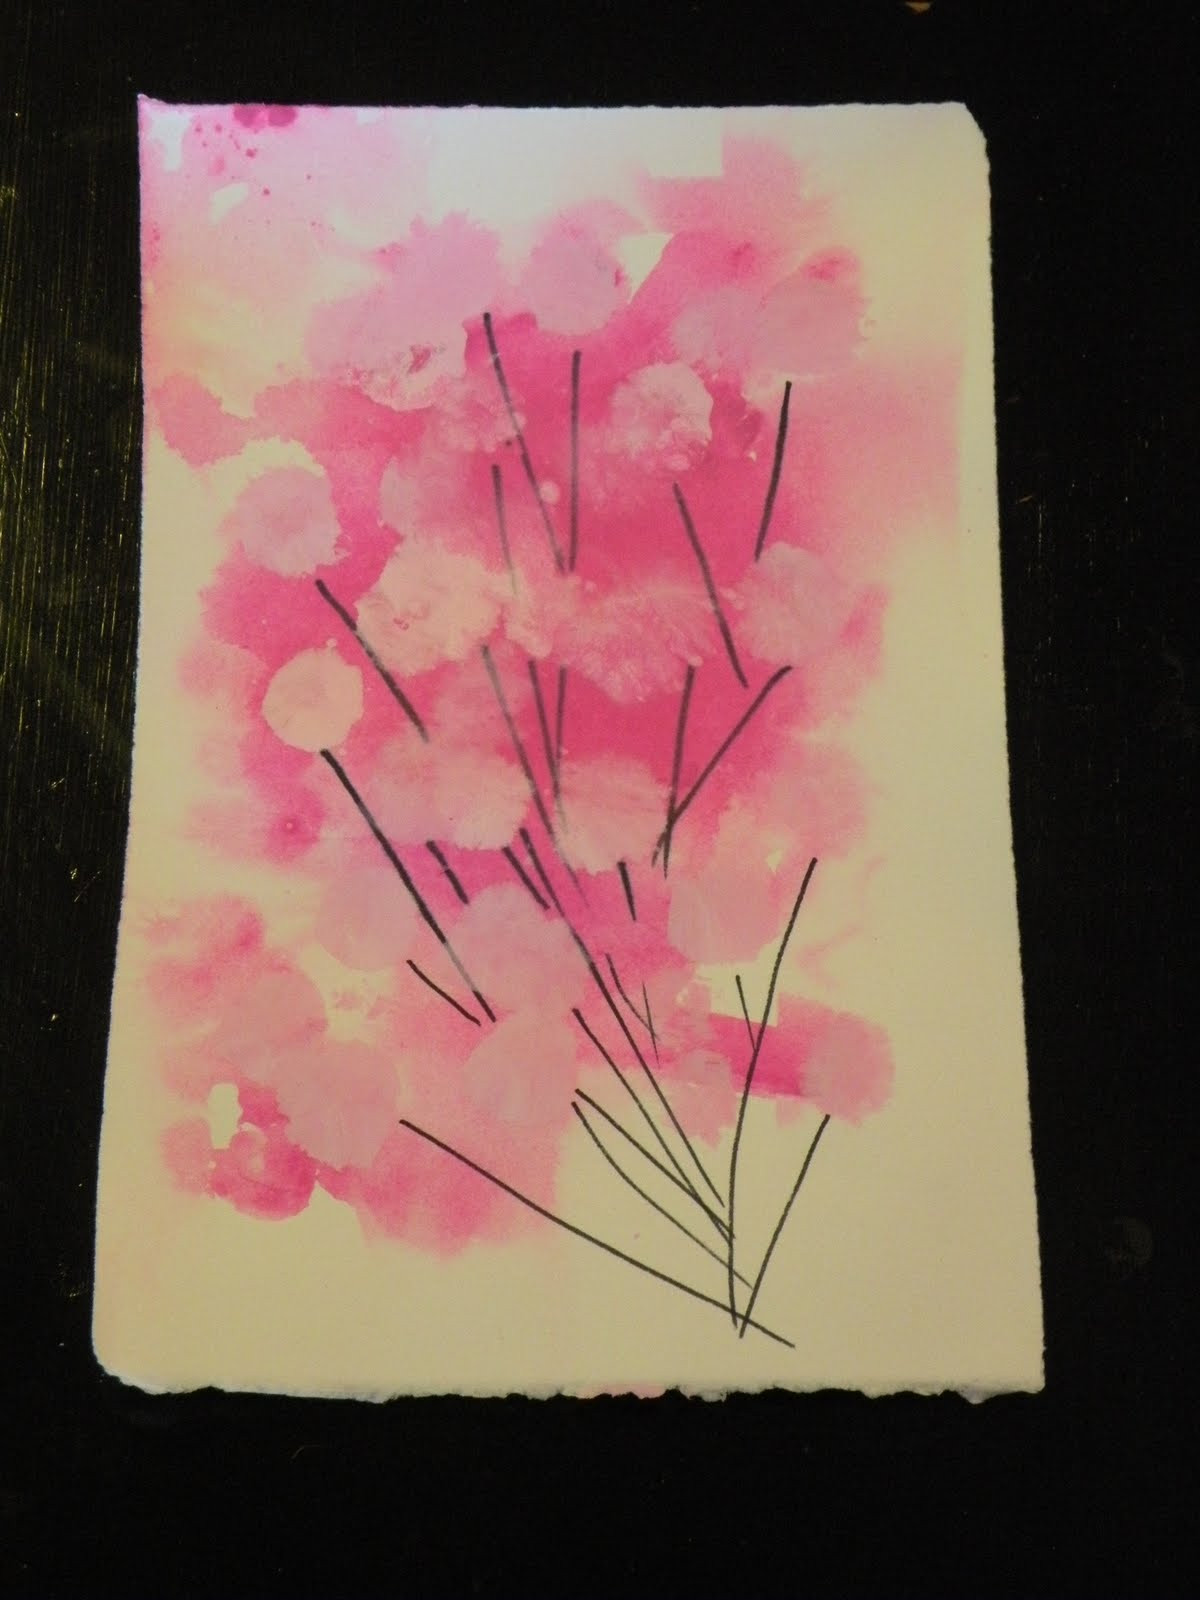 Spring Art And Craft Activities For Toddlers
 Toddler Approved Spring Blossom Painting